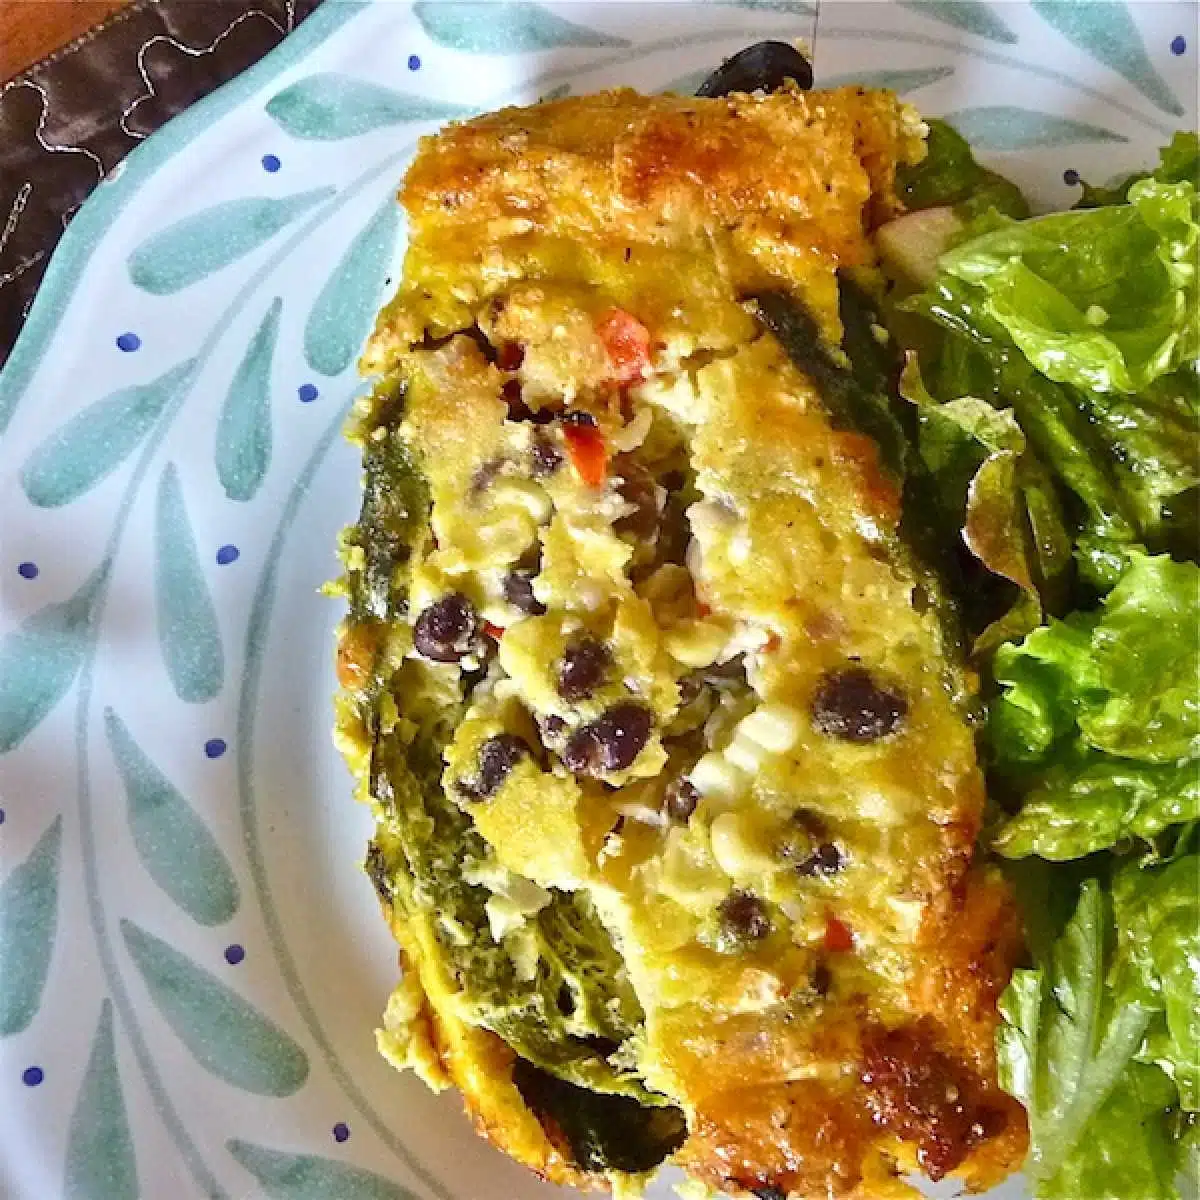 A serving of chile rellenos breakfast casserole on a plate with a salad.